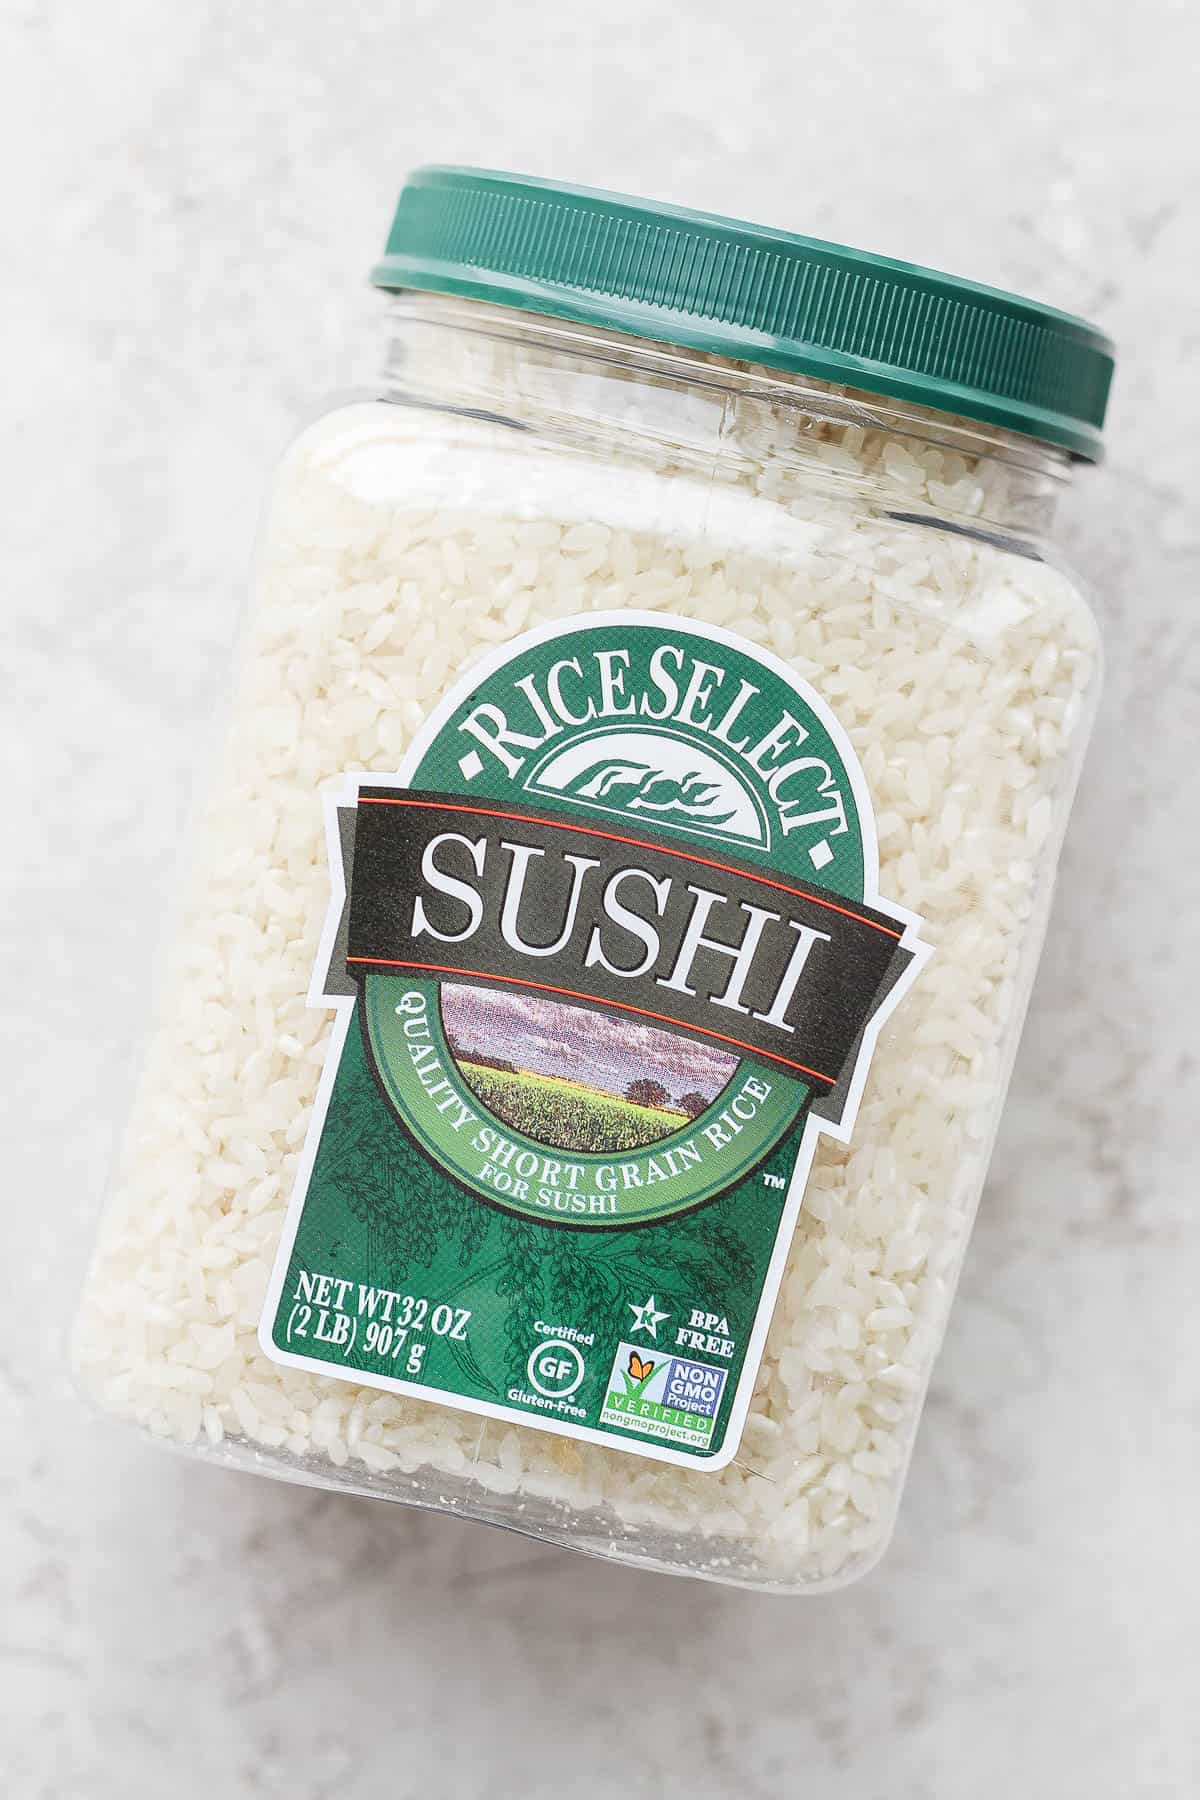 A container of sushi rice.